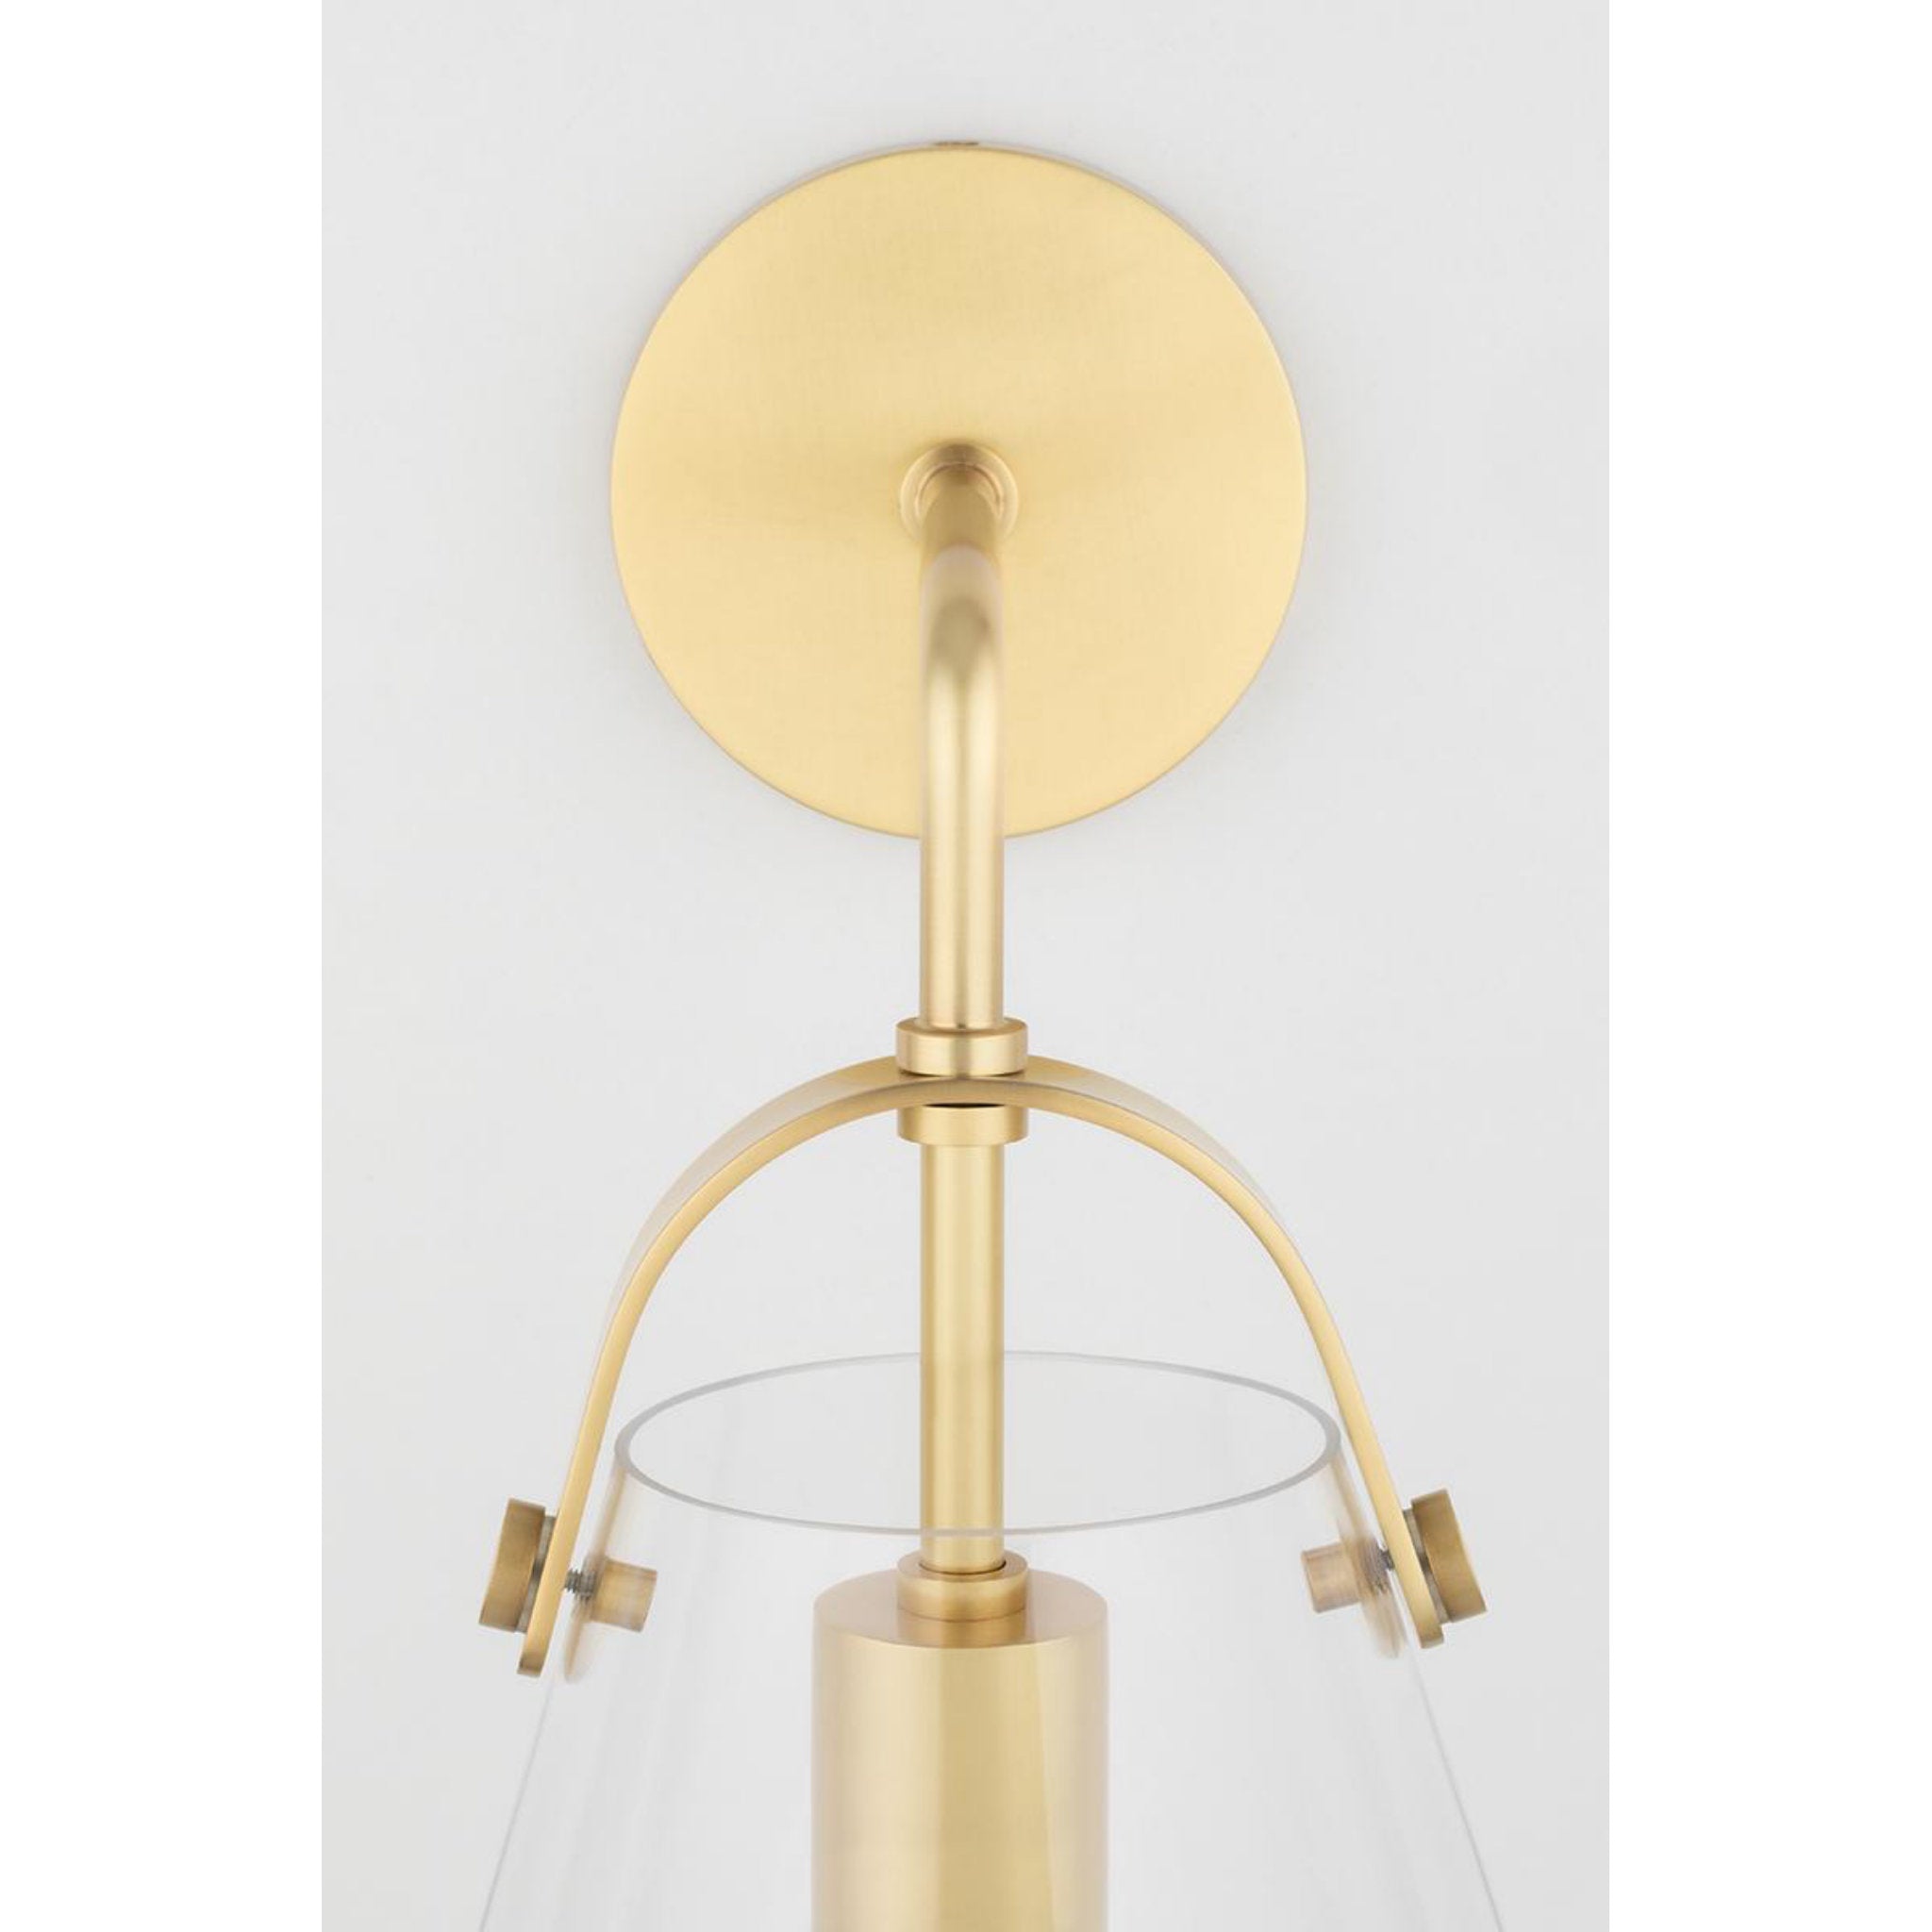 Karin 1-Light Wall Sconce in Aged Brass